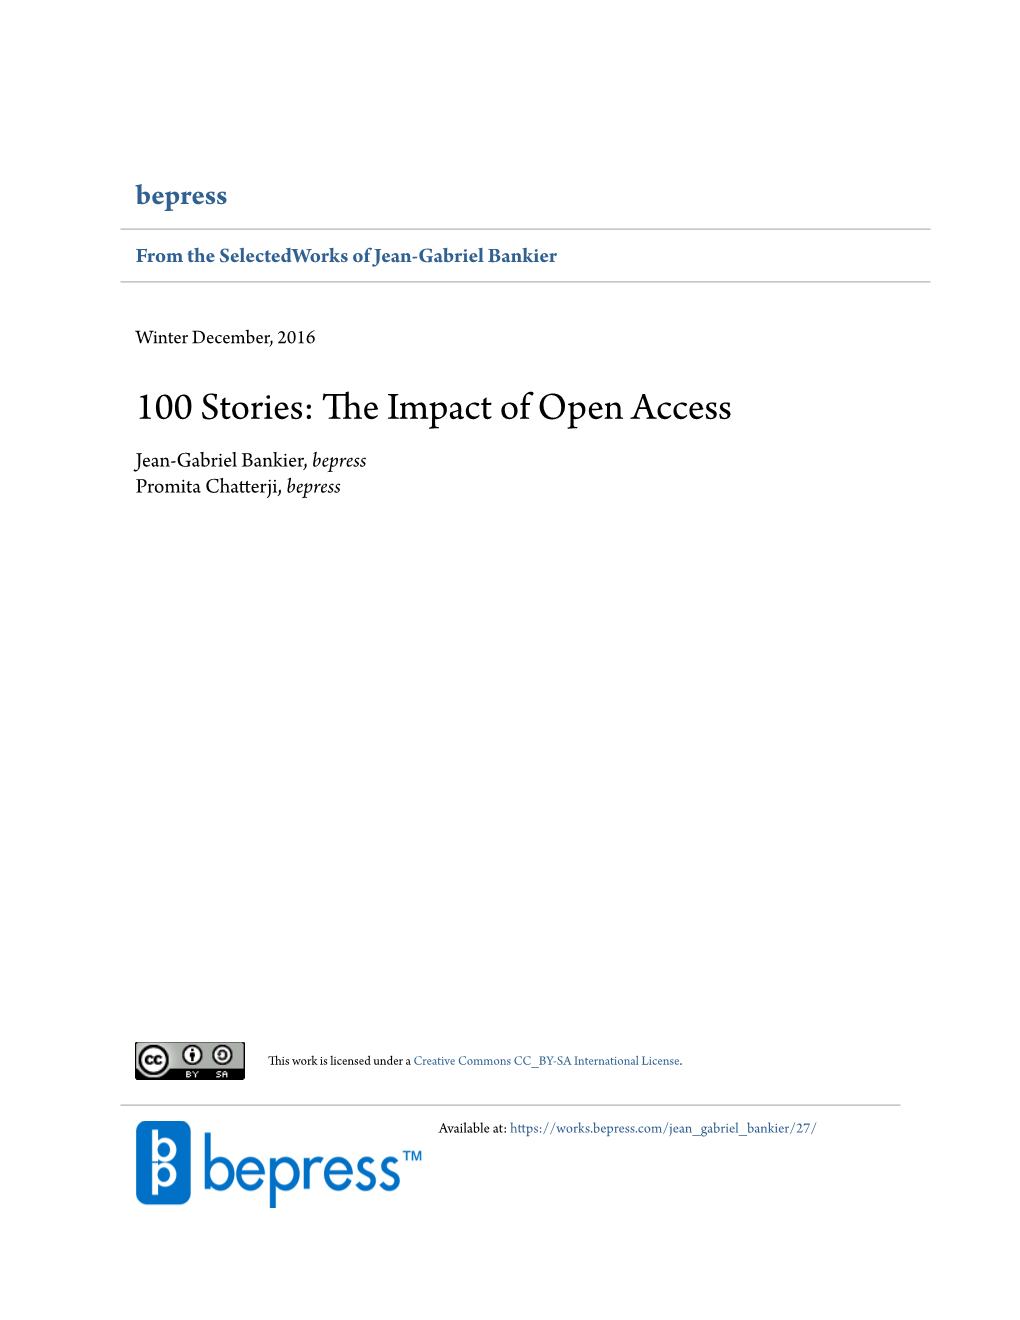 100 Stories: the Impact of Open Access 2 the Framework